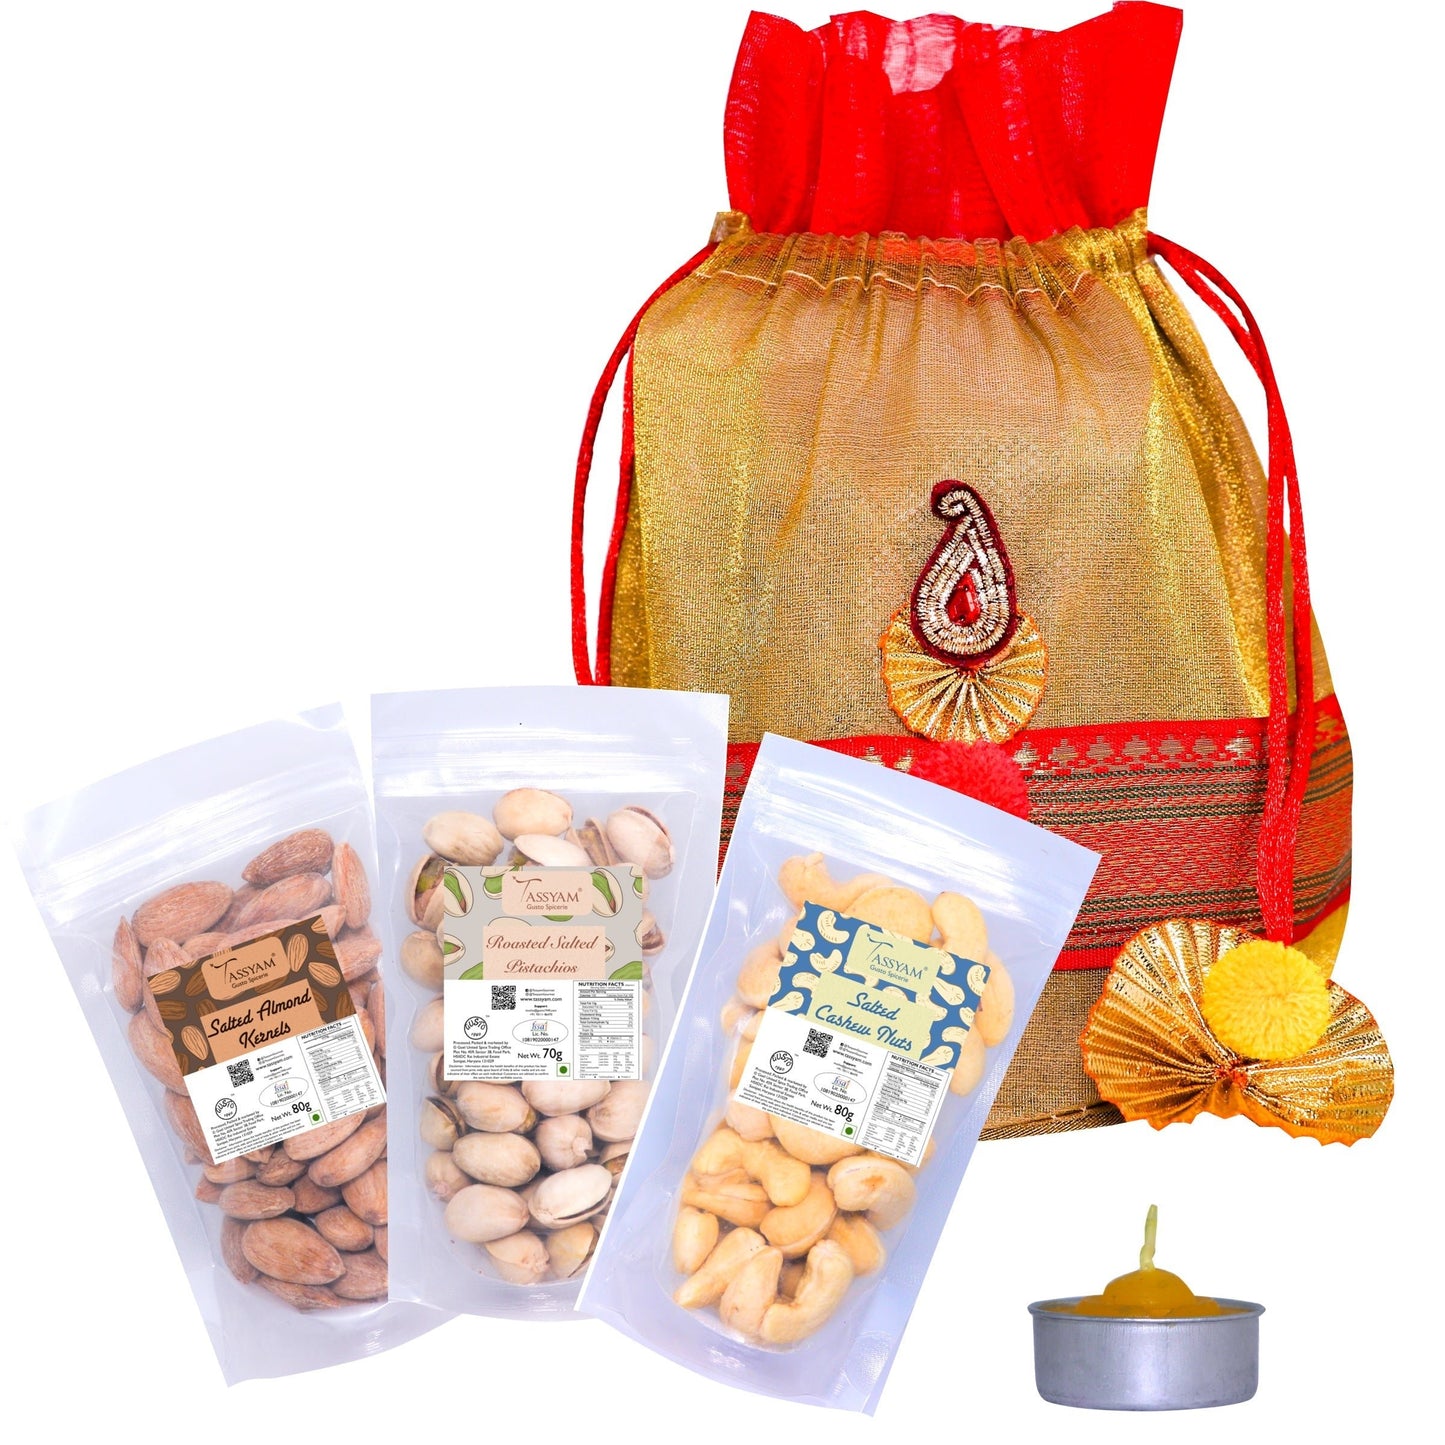 Diwali Salted Dry Fruits with Free Pouch and Diwali Lamp - Tassyam Organics